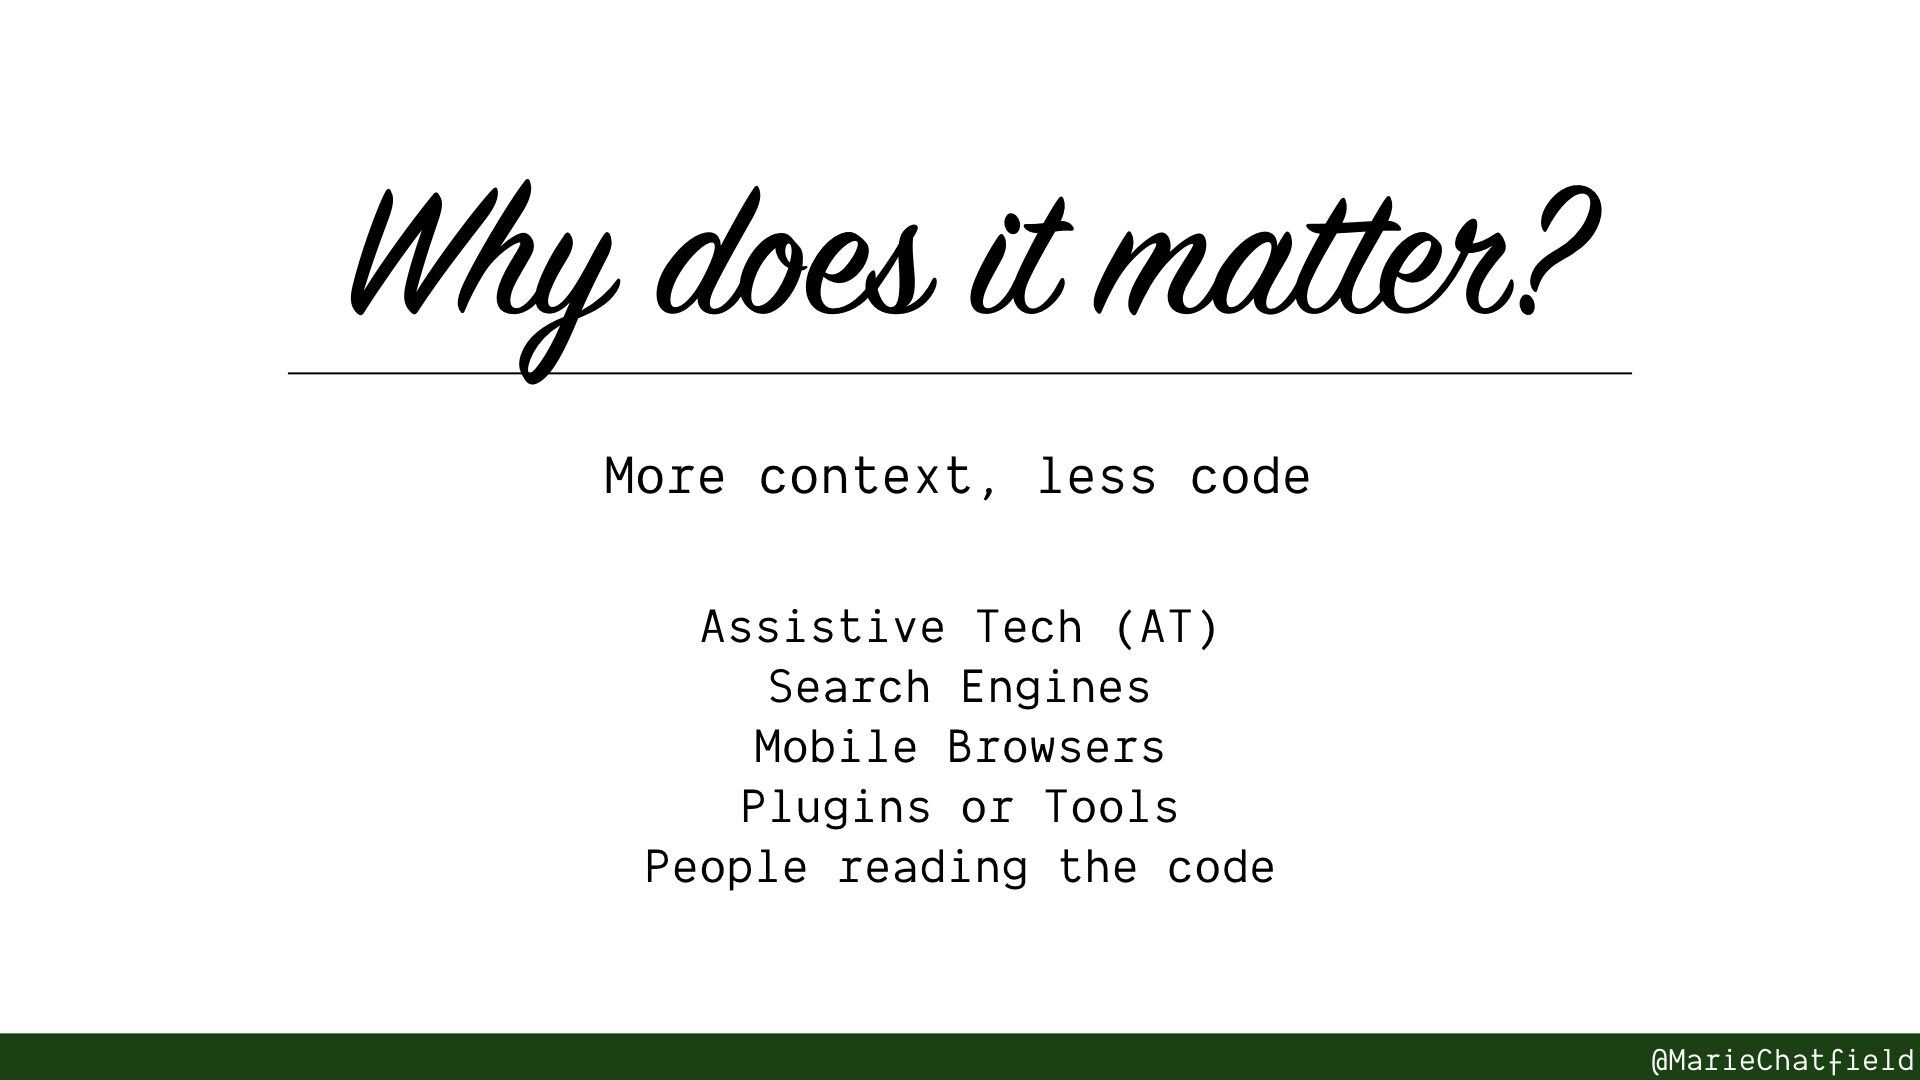 Semantic HTML matters because there is more context with less code